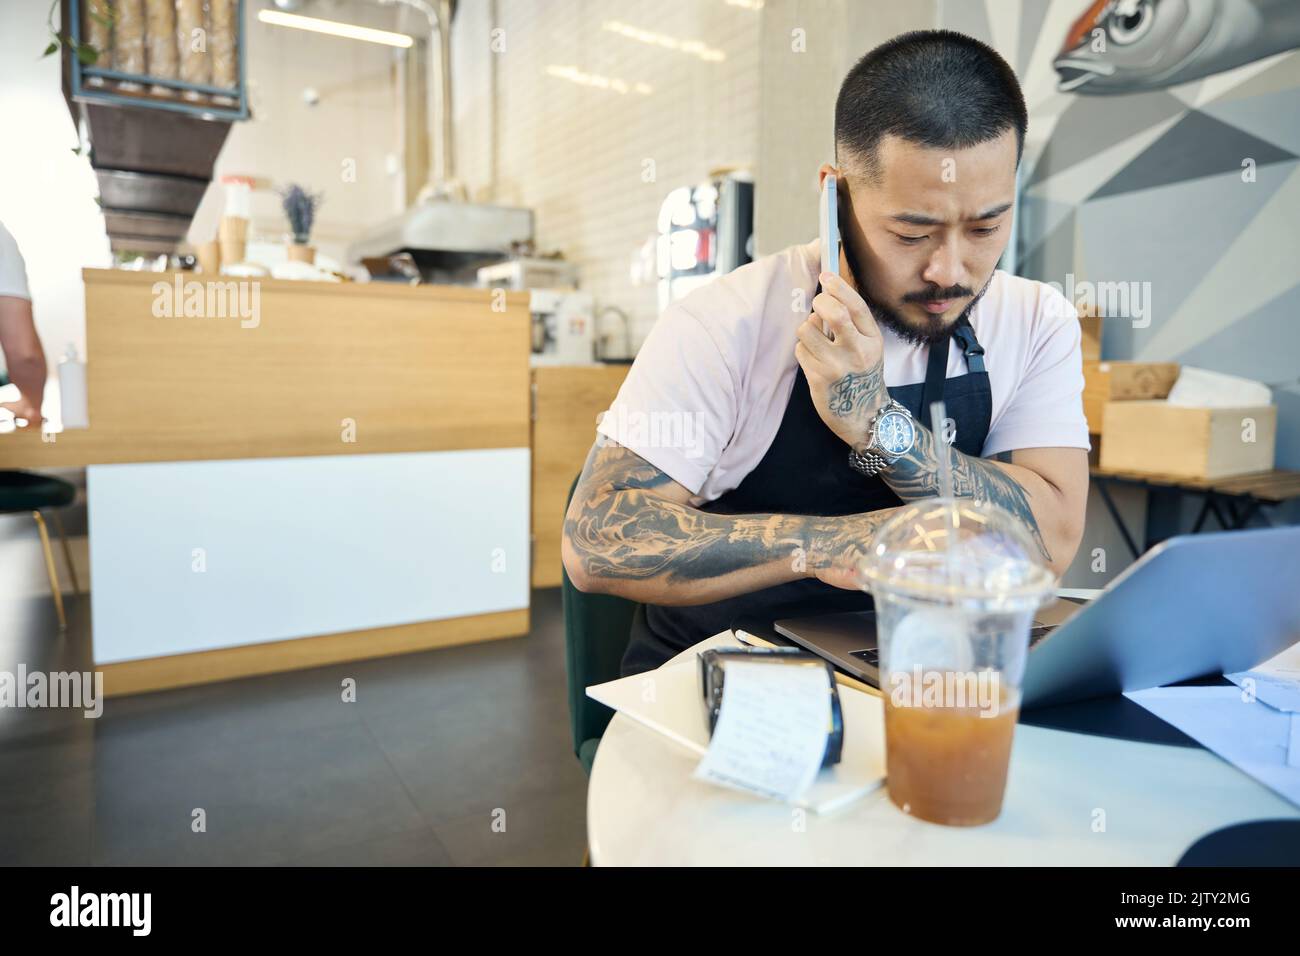 Preoccupied young man sorting out his work at coffee shop Stock Photo